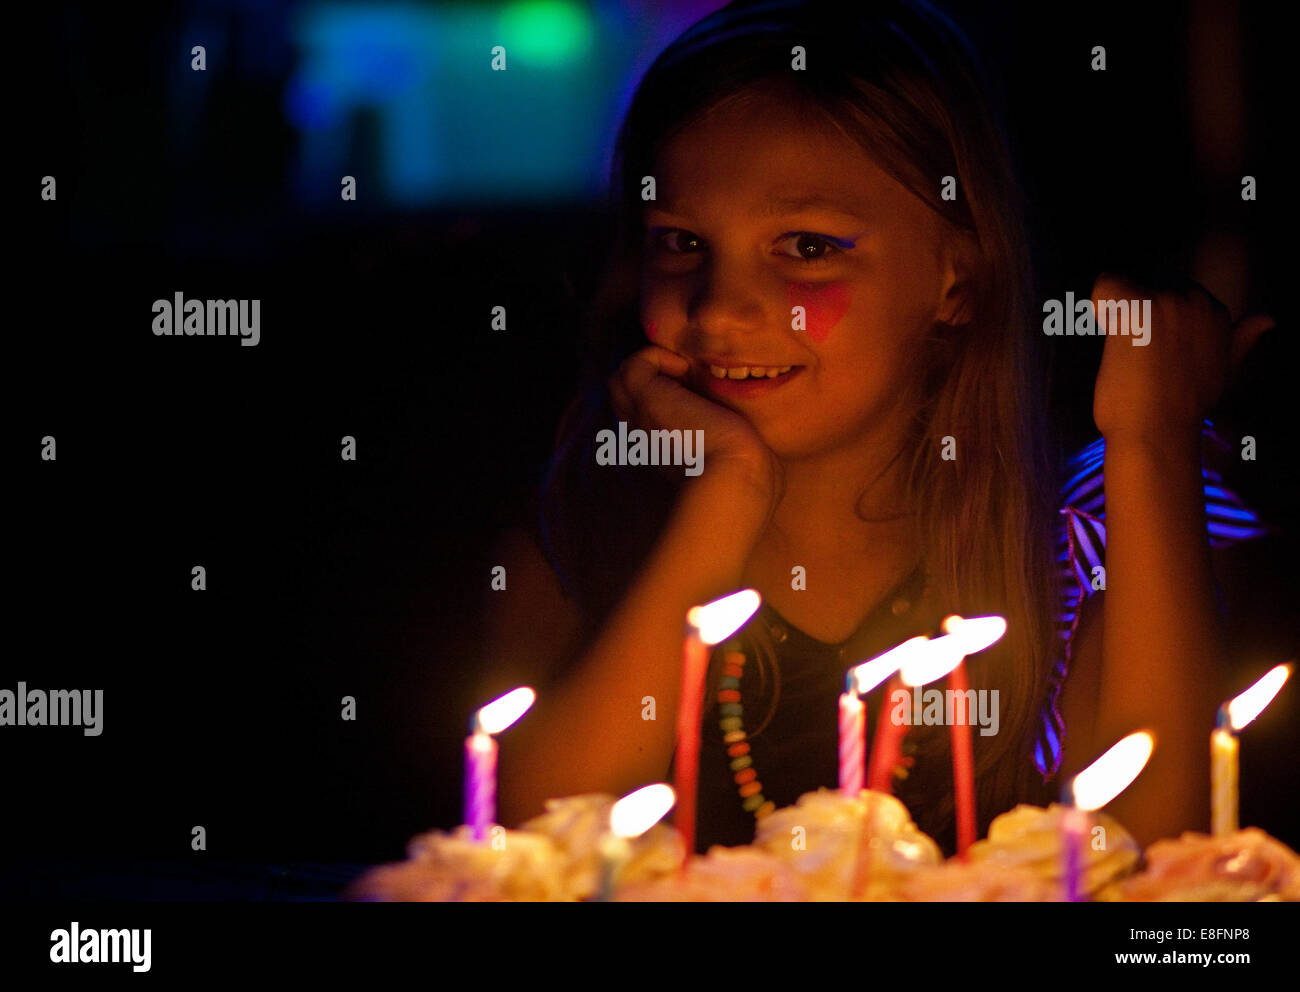 Smiling girl with heart shaped face paint sitting by her birthday cake Stock Photo